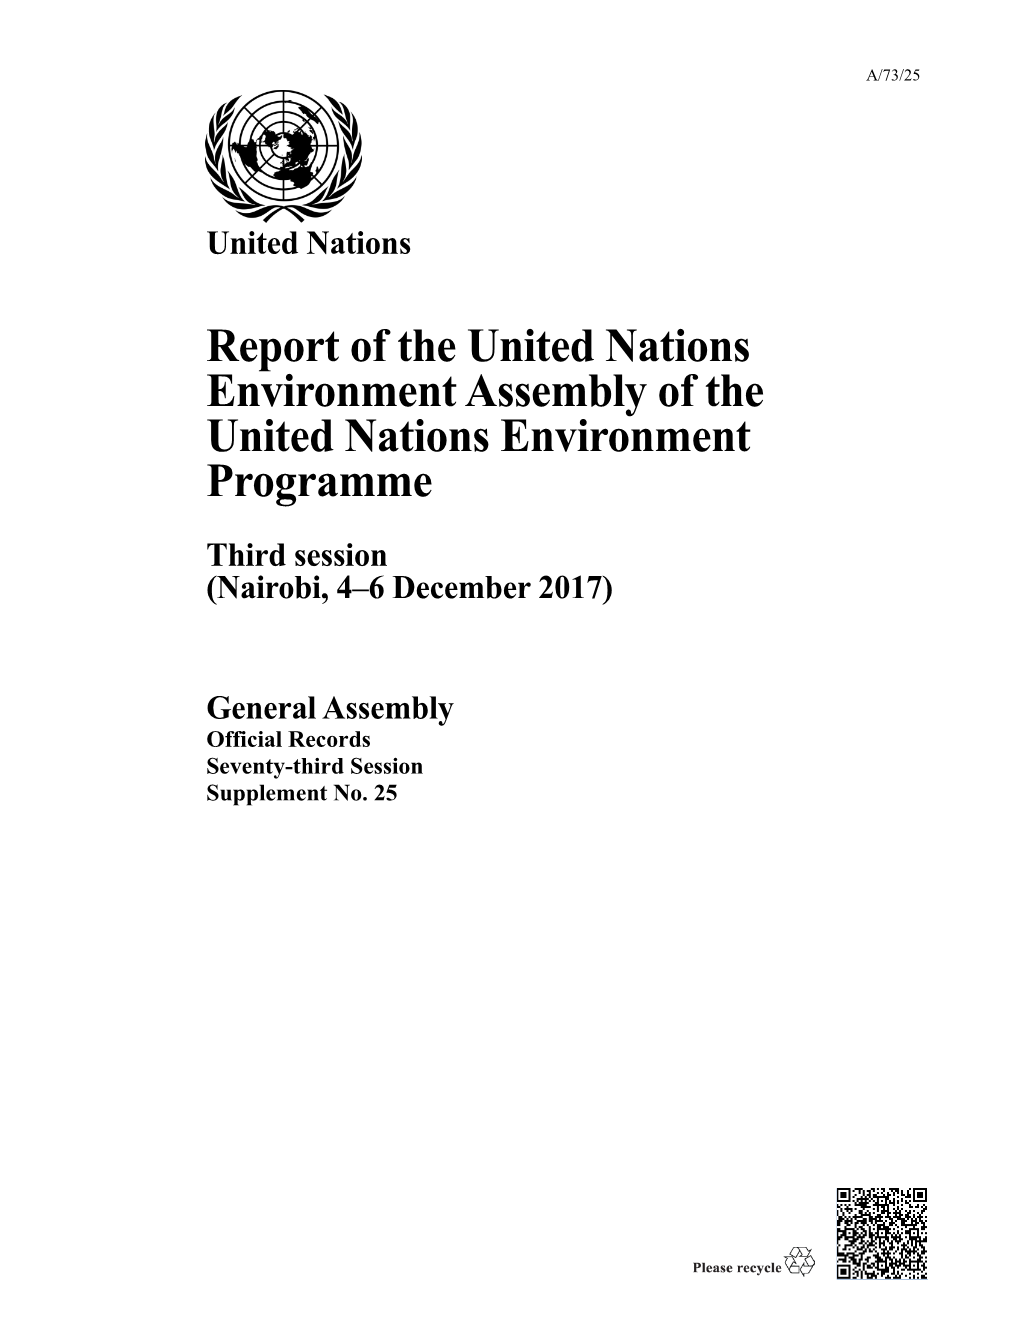 Report of the United Nations Environment Assembly of the United Nations Environment Programme